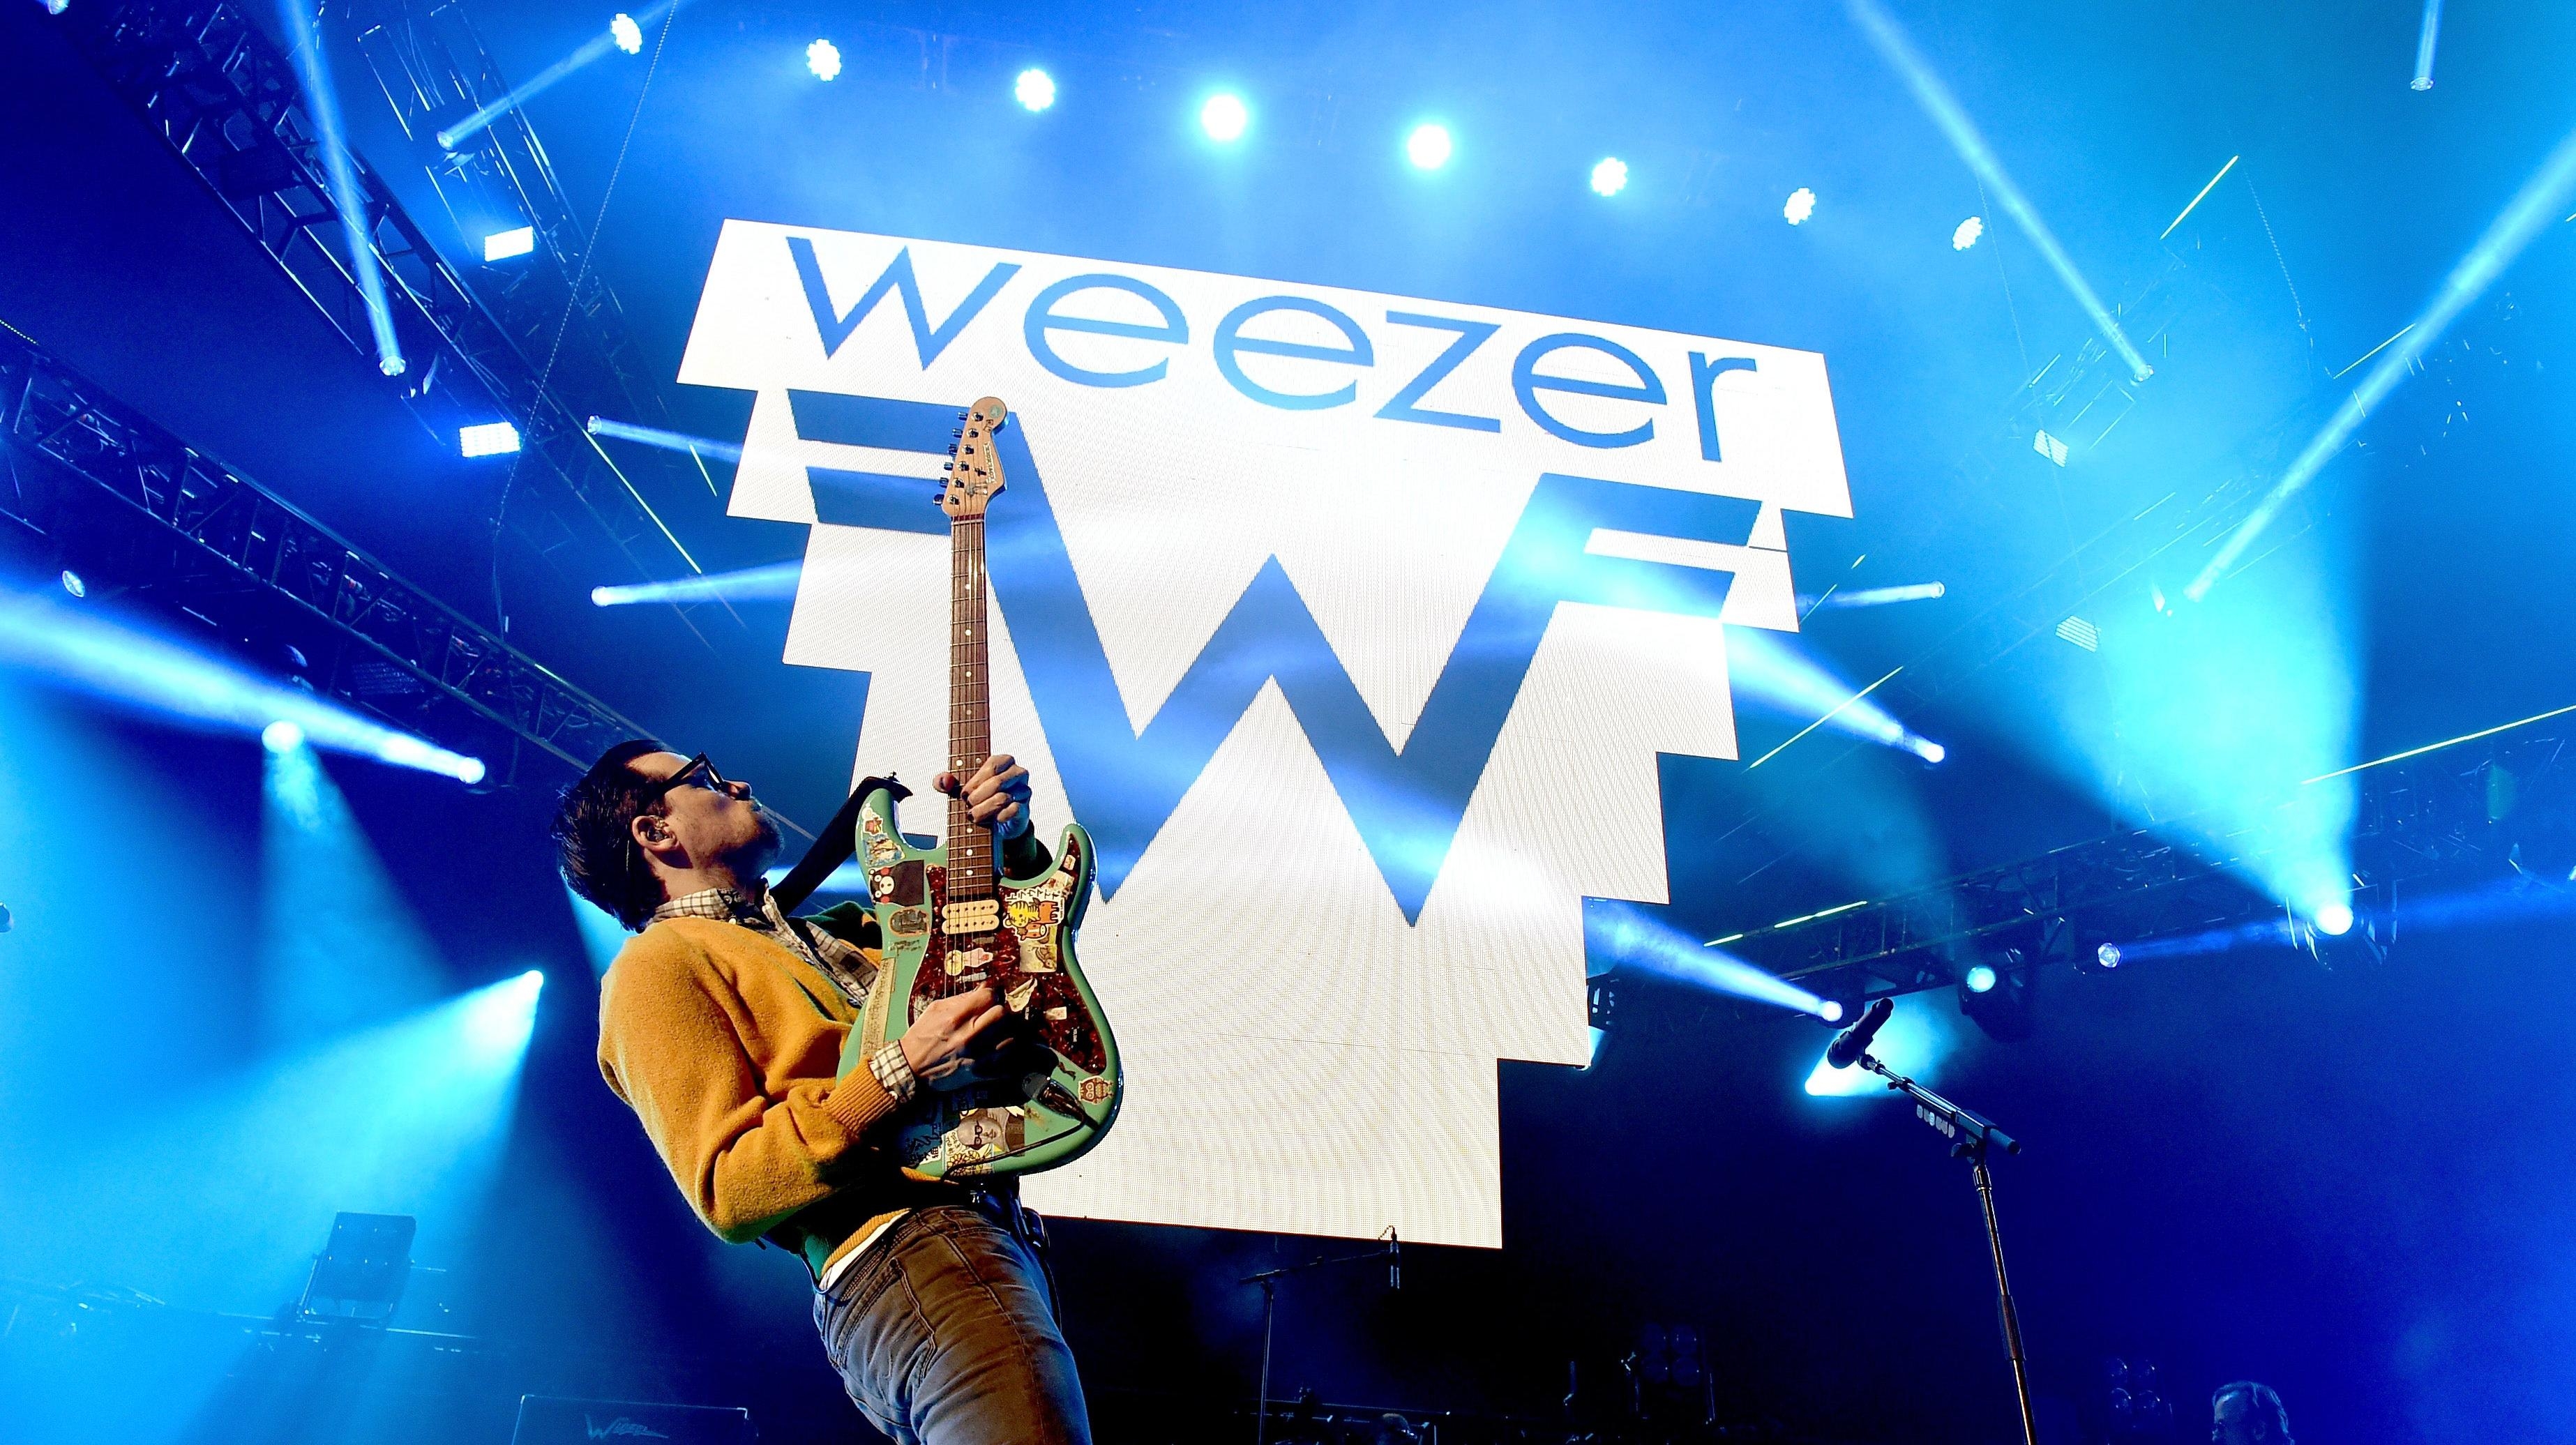 Rivers Cuomo confirms Weezer’s summer SZNZ EP will be “Blue Album in the 21st century” themed